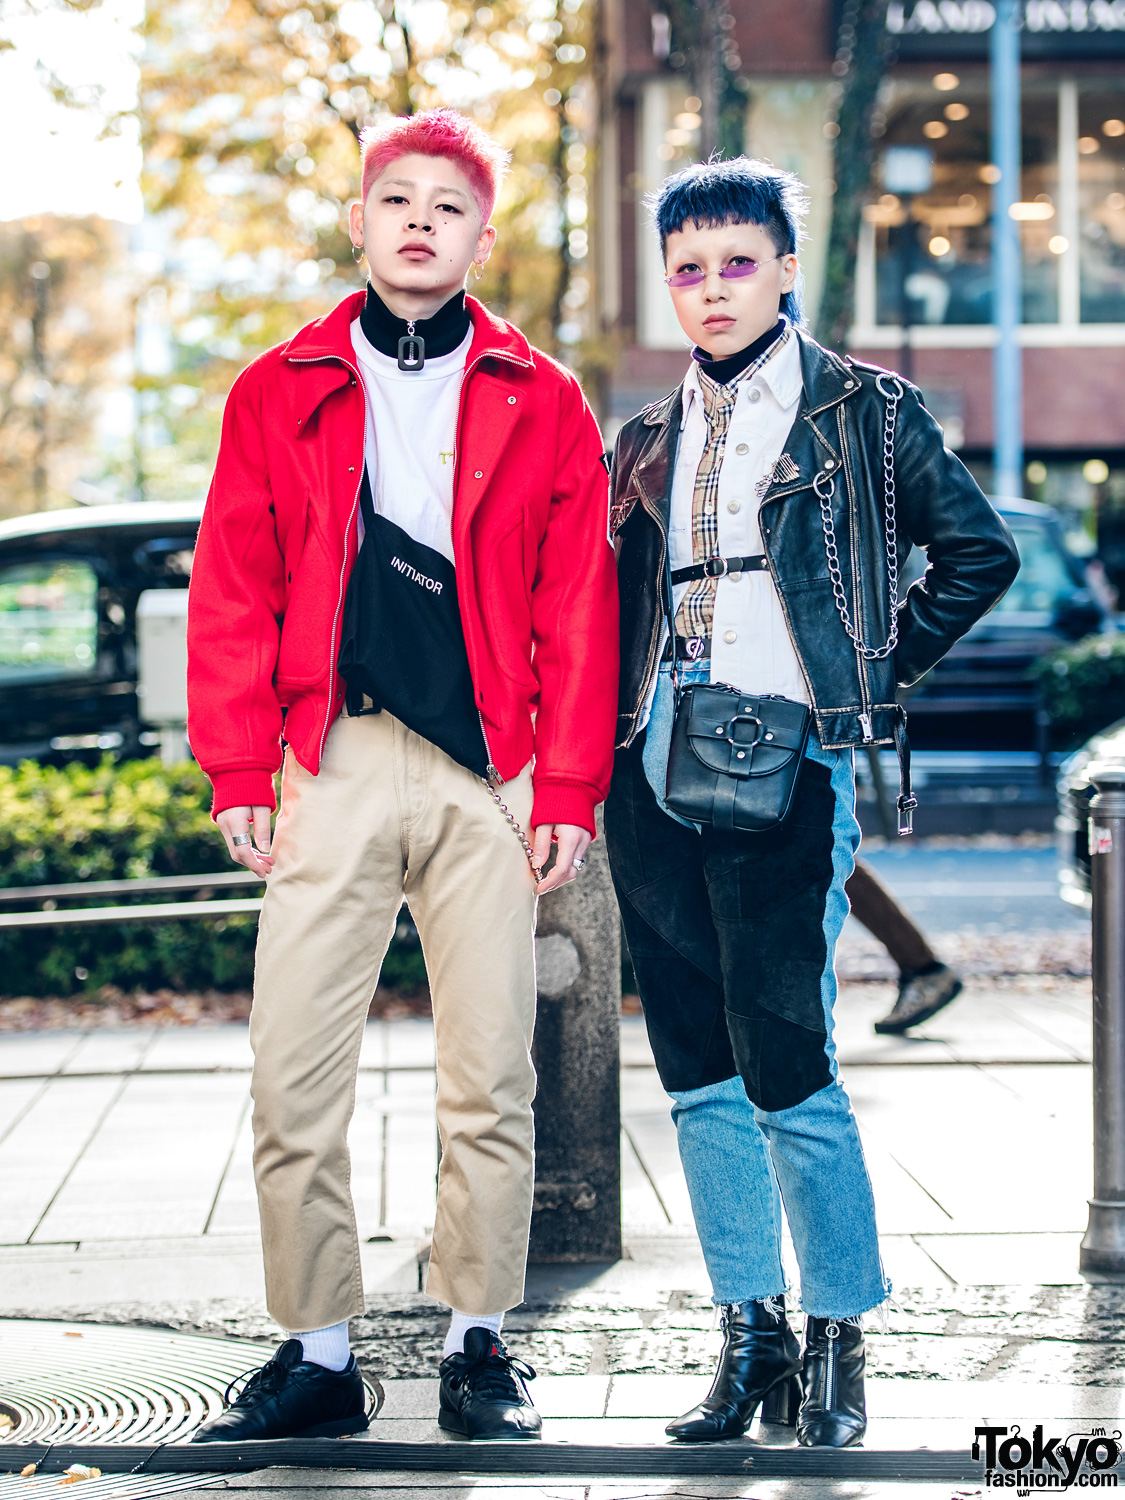 Harajuku Duo in Color-Coordinated Japanese Streetwear & Edgy Hair Styles